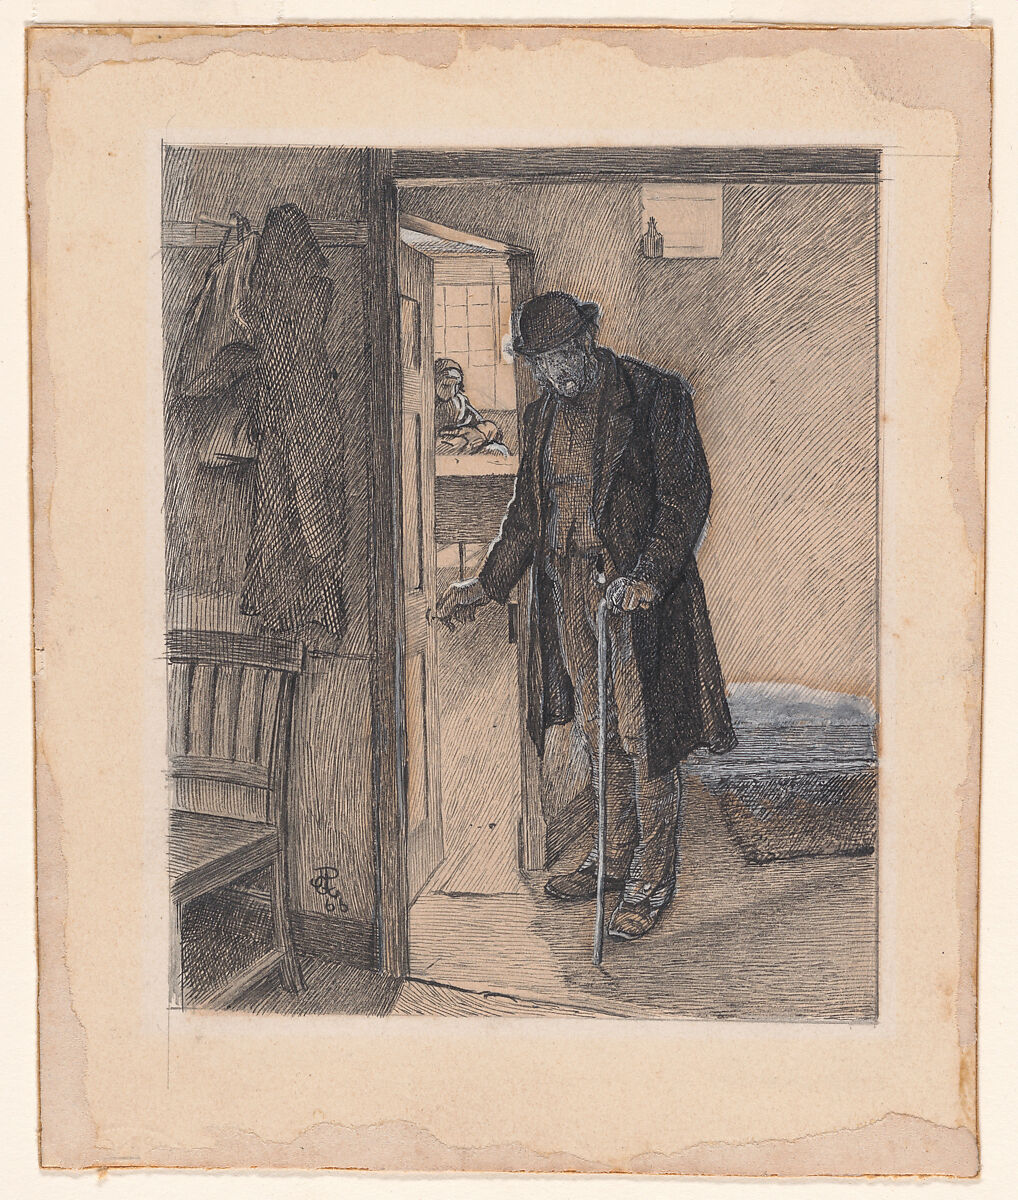 "A man of strife in wrathful mood, he neared the nurse's door." Study for "Strife and Peace", George John Pinwell (British, London 1842–1875 London), Pen and ink with white gouache (bodycolor) on artist's board 